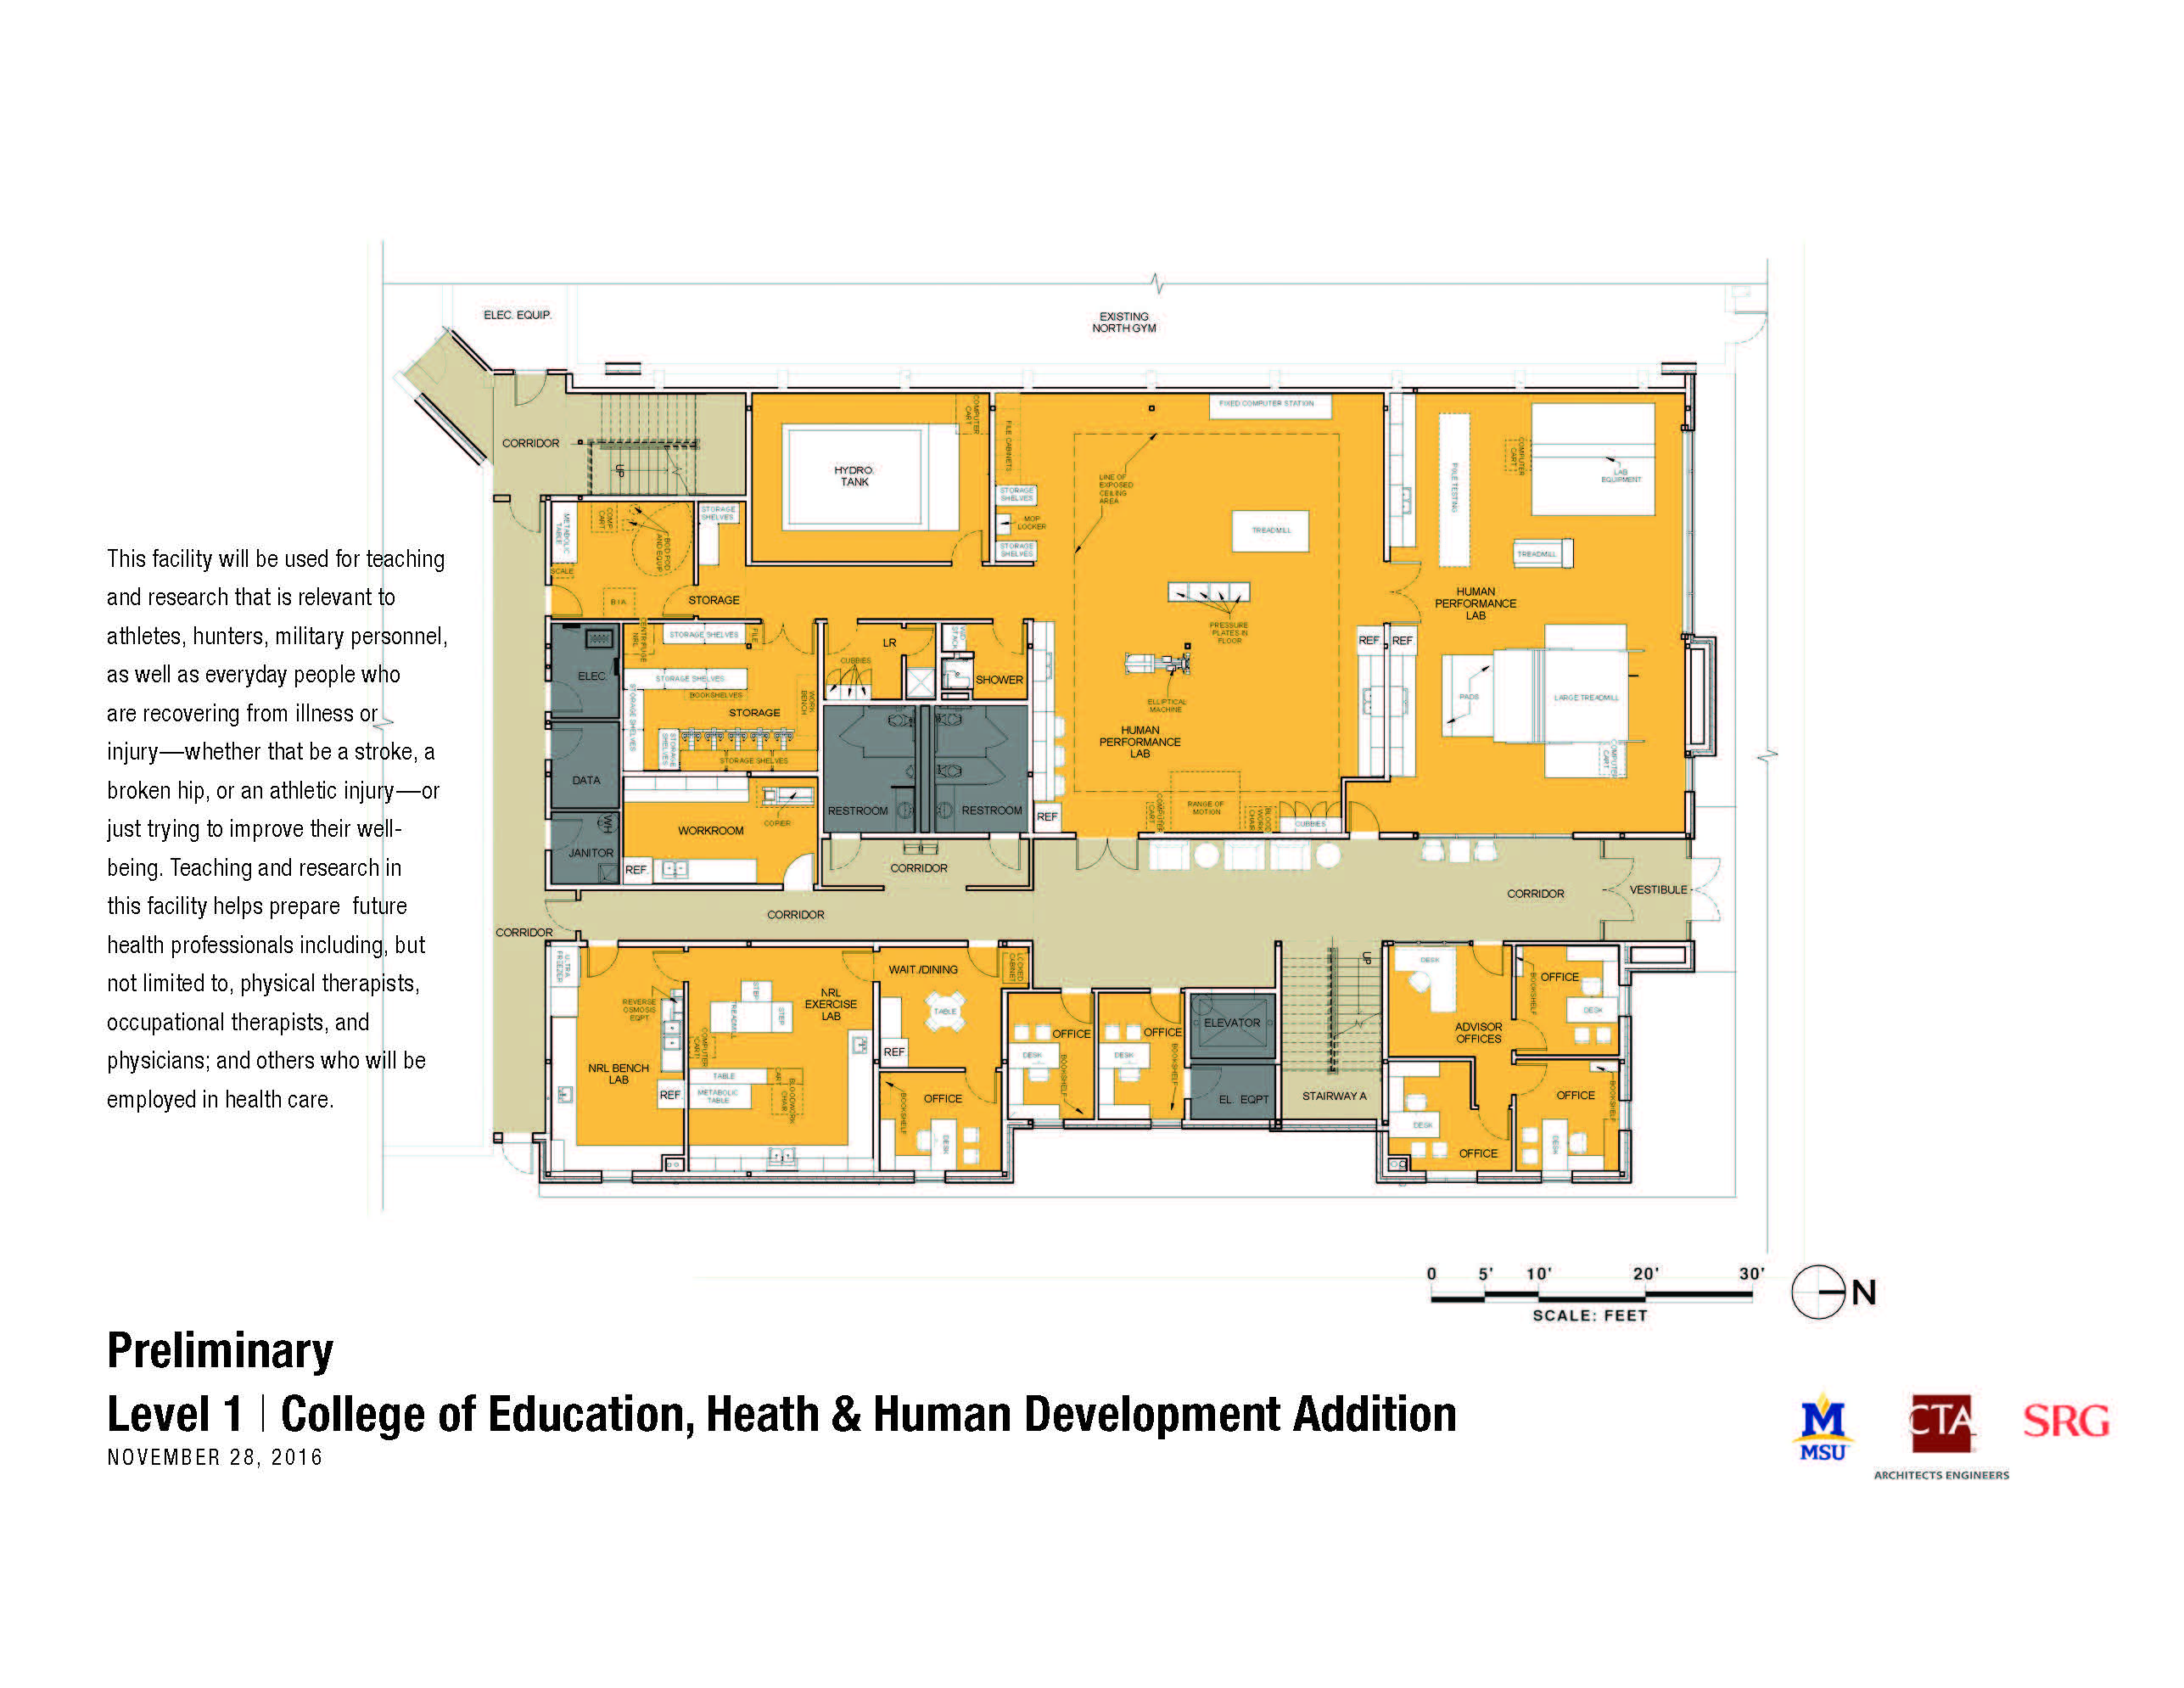 Preliminary floorplan design for a College of Education, Health and Human Development Addition.